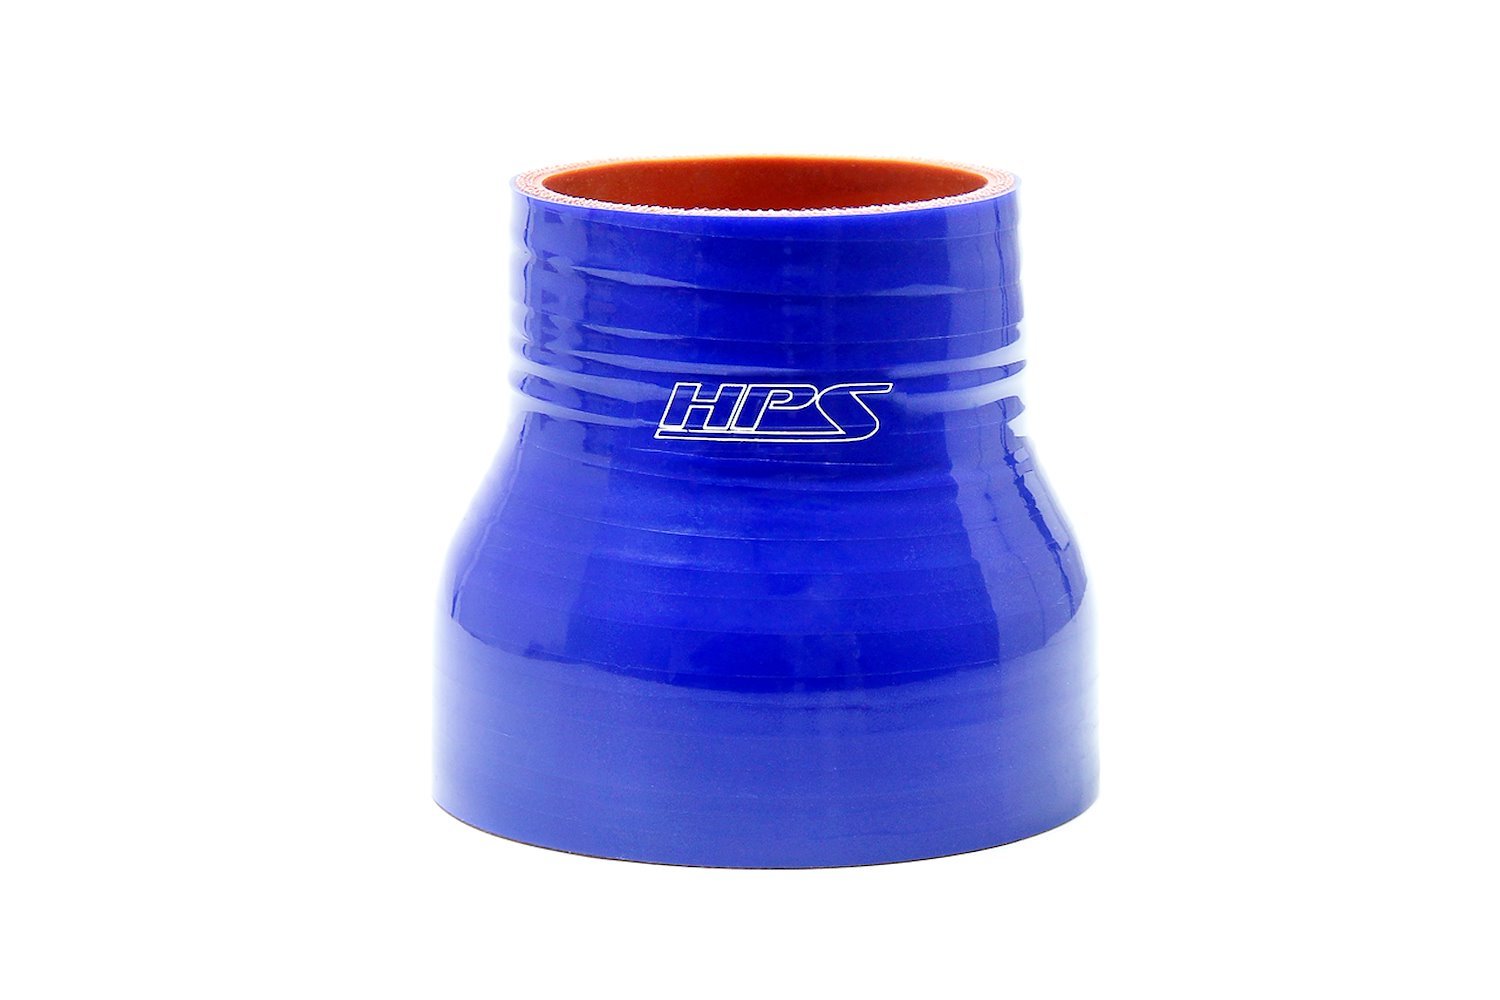 HTSR-225-275-BLUE Silicone Reducer Hose, High-Temp 4-Ply Reinforced, 2-1/4 in. - 2-3/4 in. ID, 3 in. Long, Blue